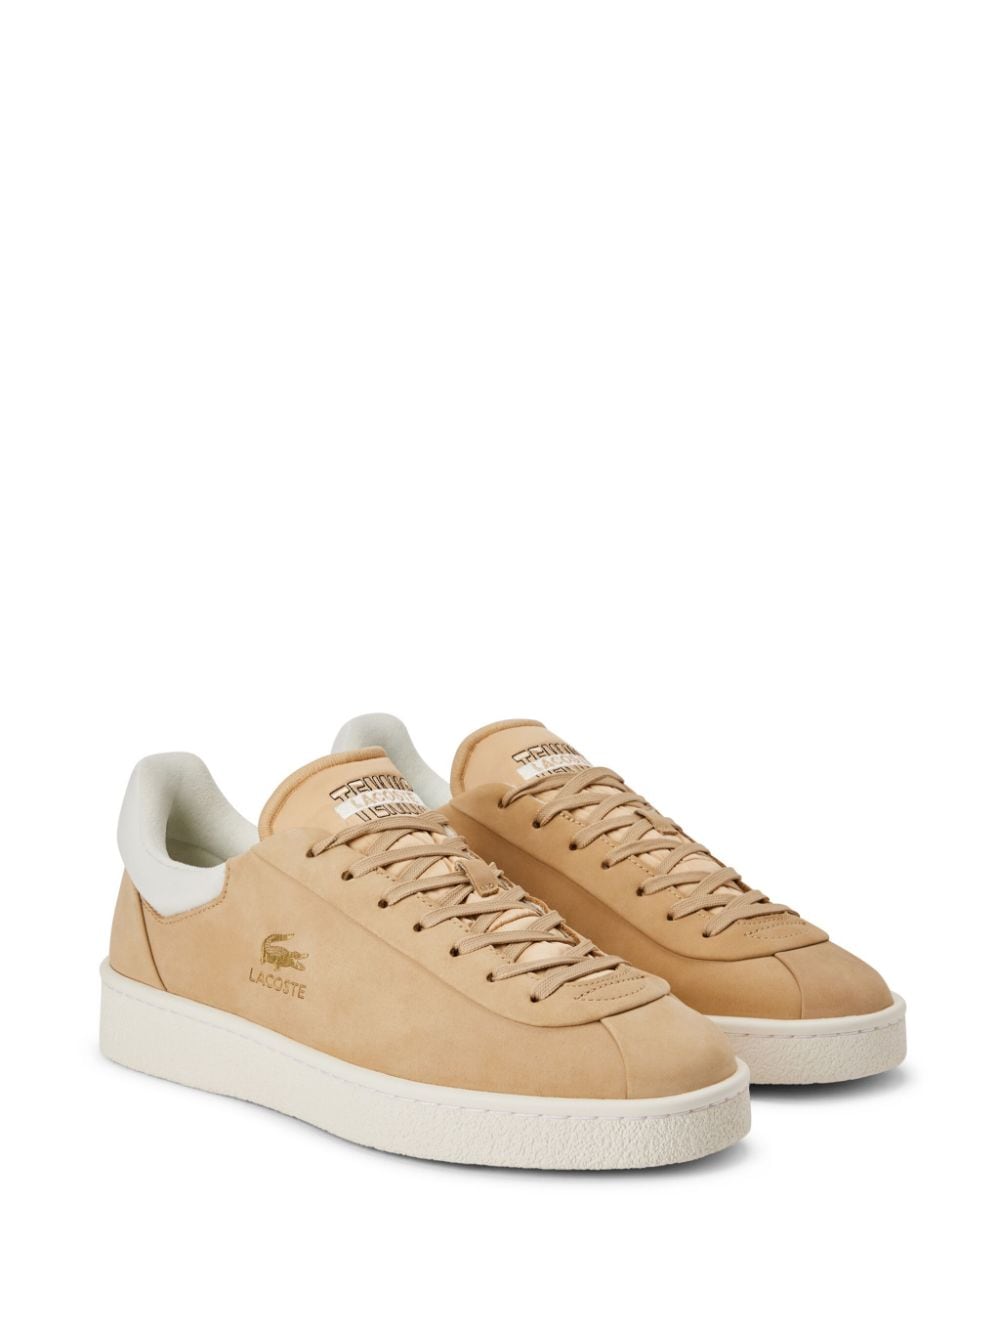 Lacoste logo-stamp lace-up sneakers - Beige